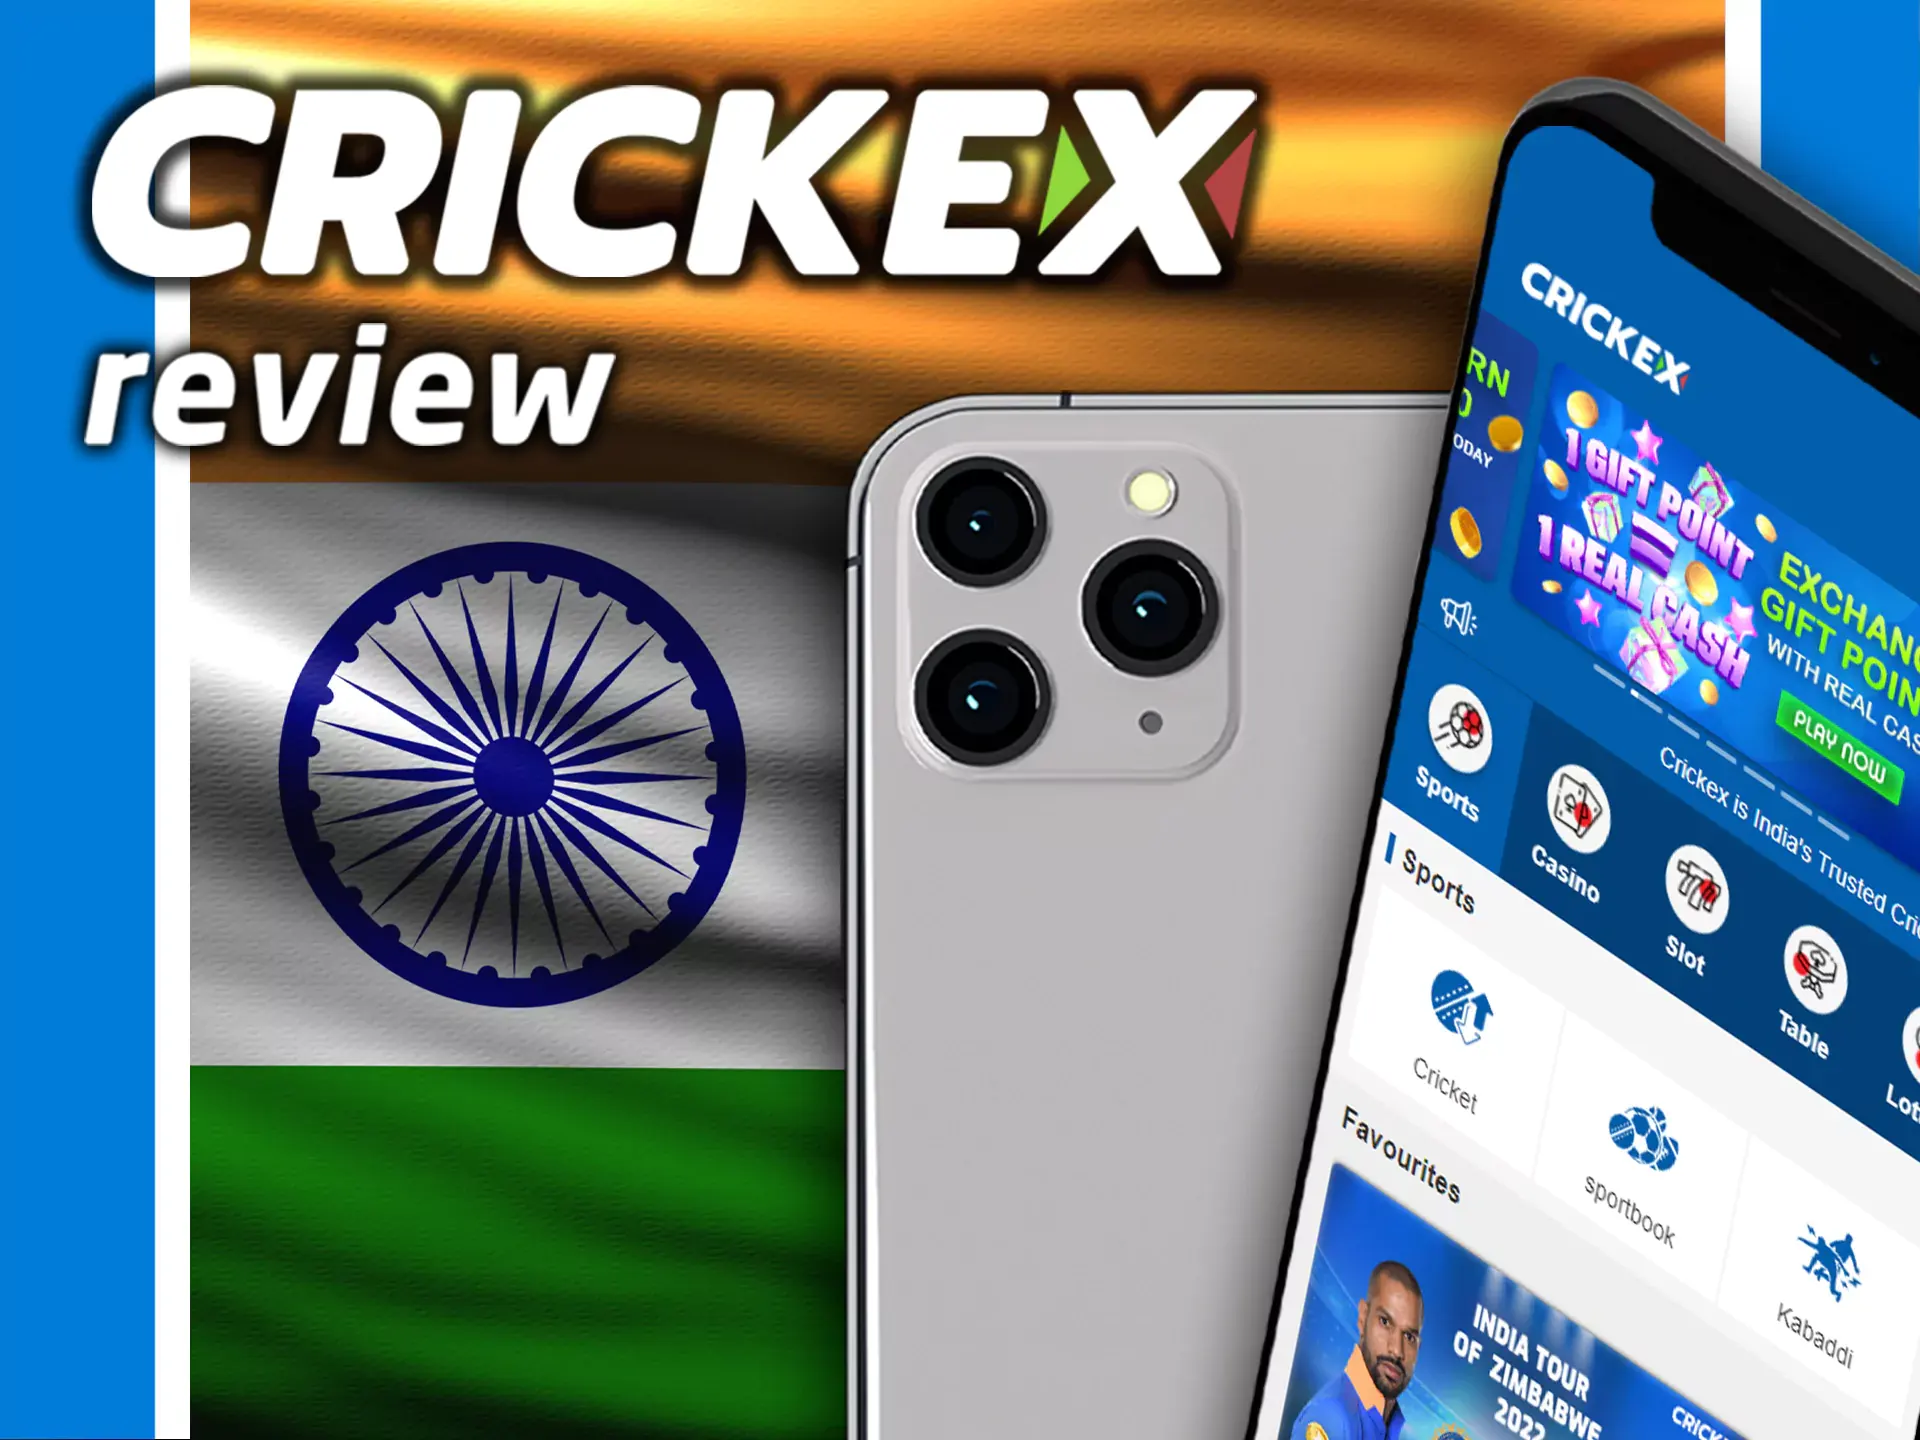 The Crickex app is great for betting on sports in India.